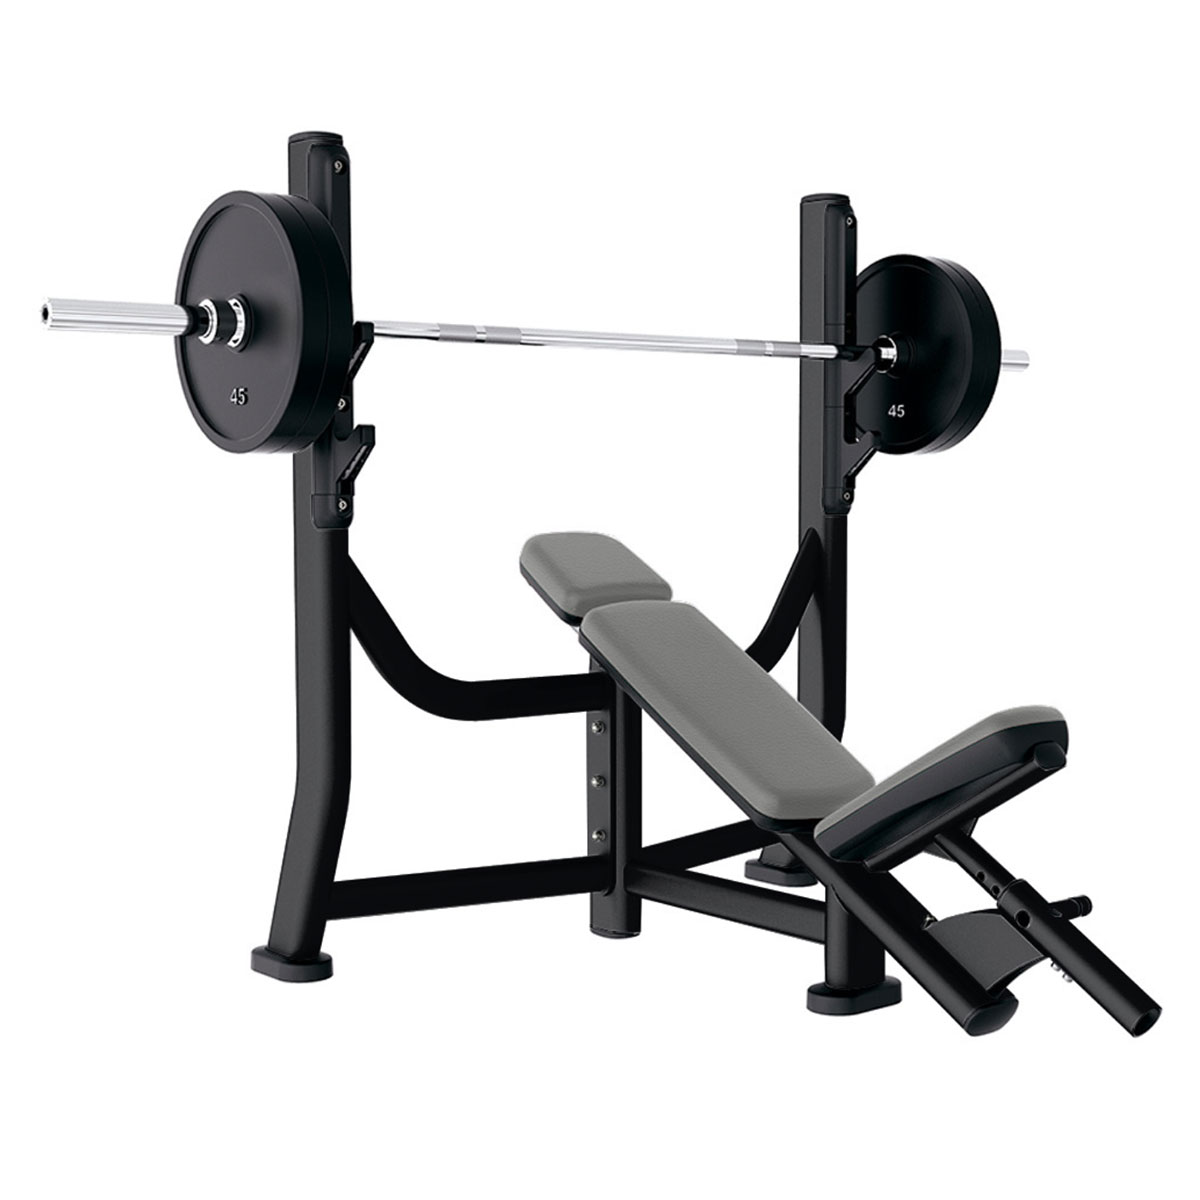 https://www.usedgymequipment.com/wp-content/uploads/2019/03/Life-Fitness-Signature-Series-Olympic-Incline-Bench.jpg